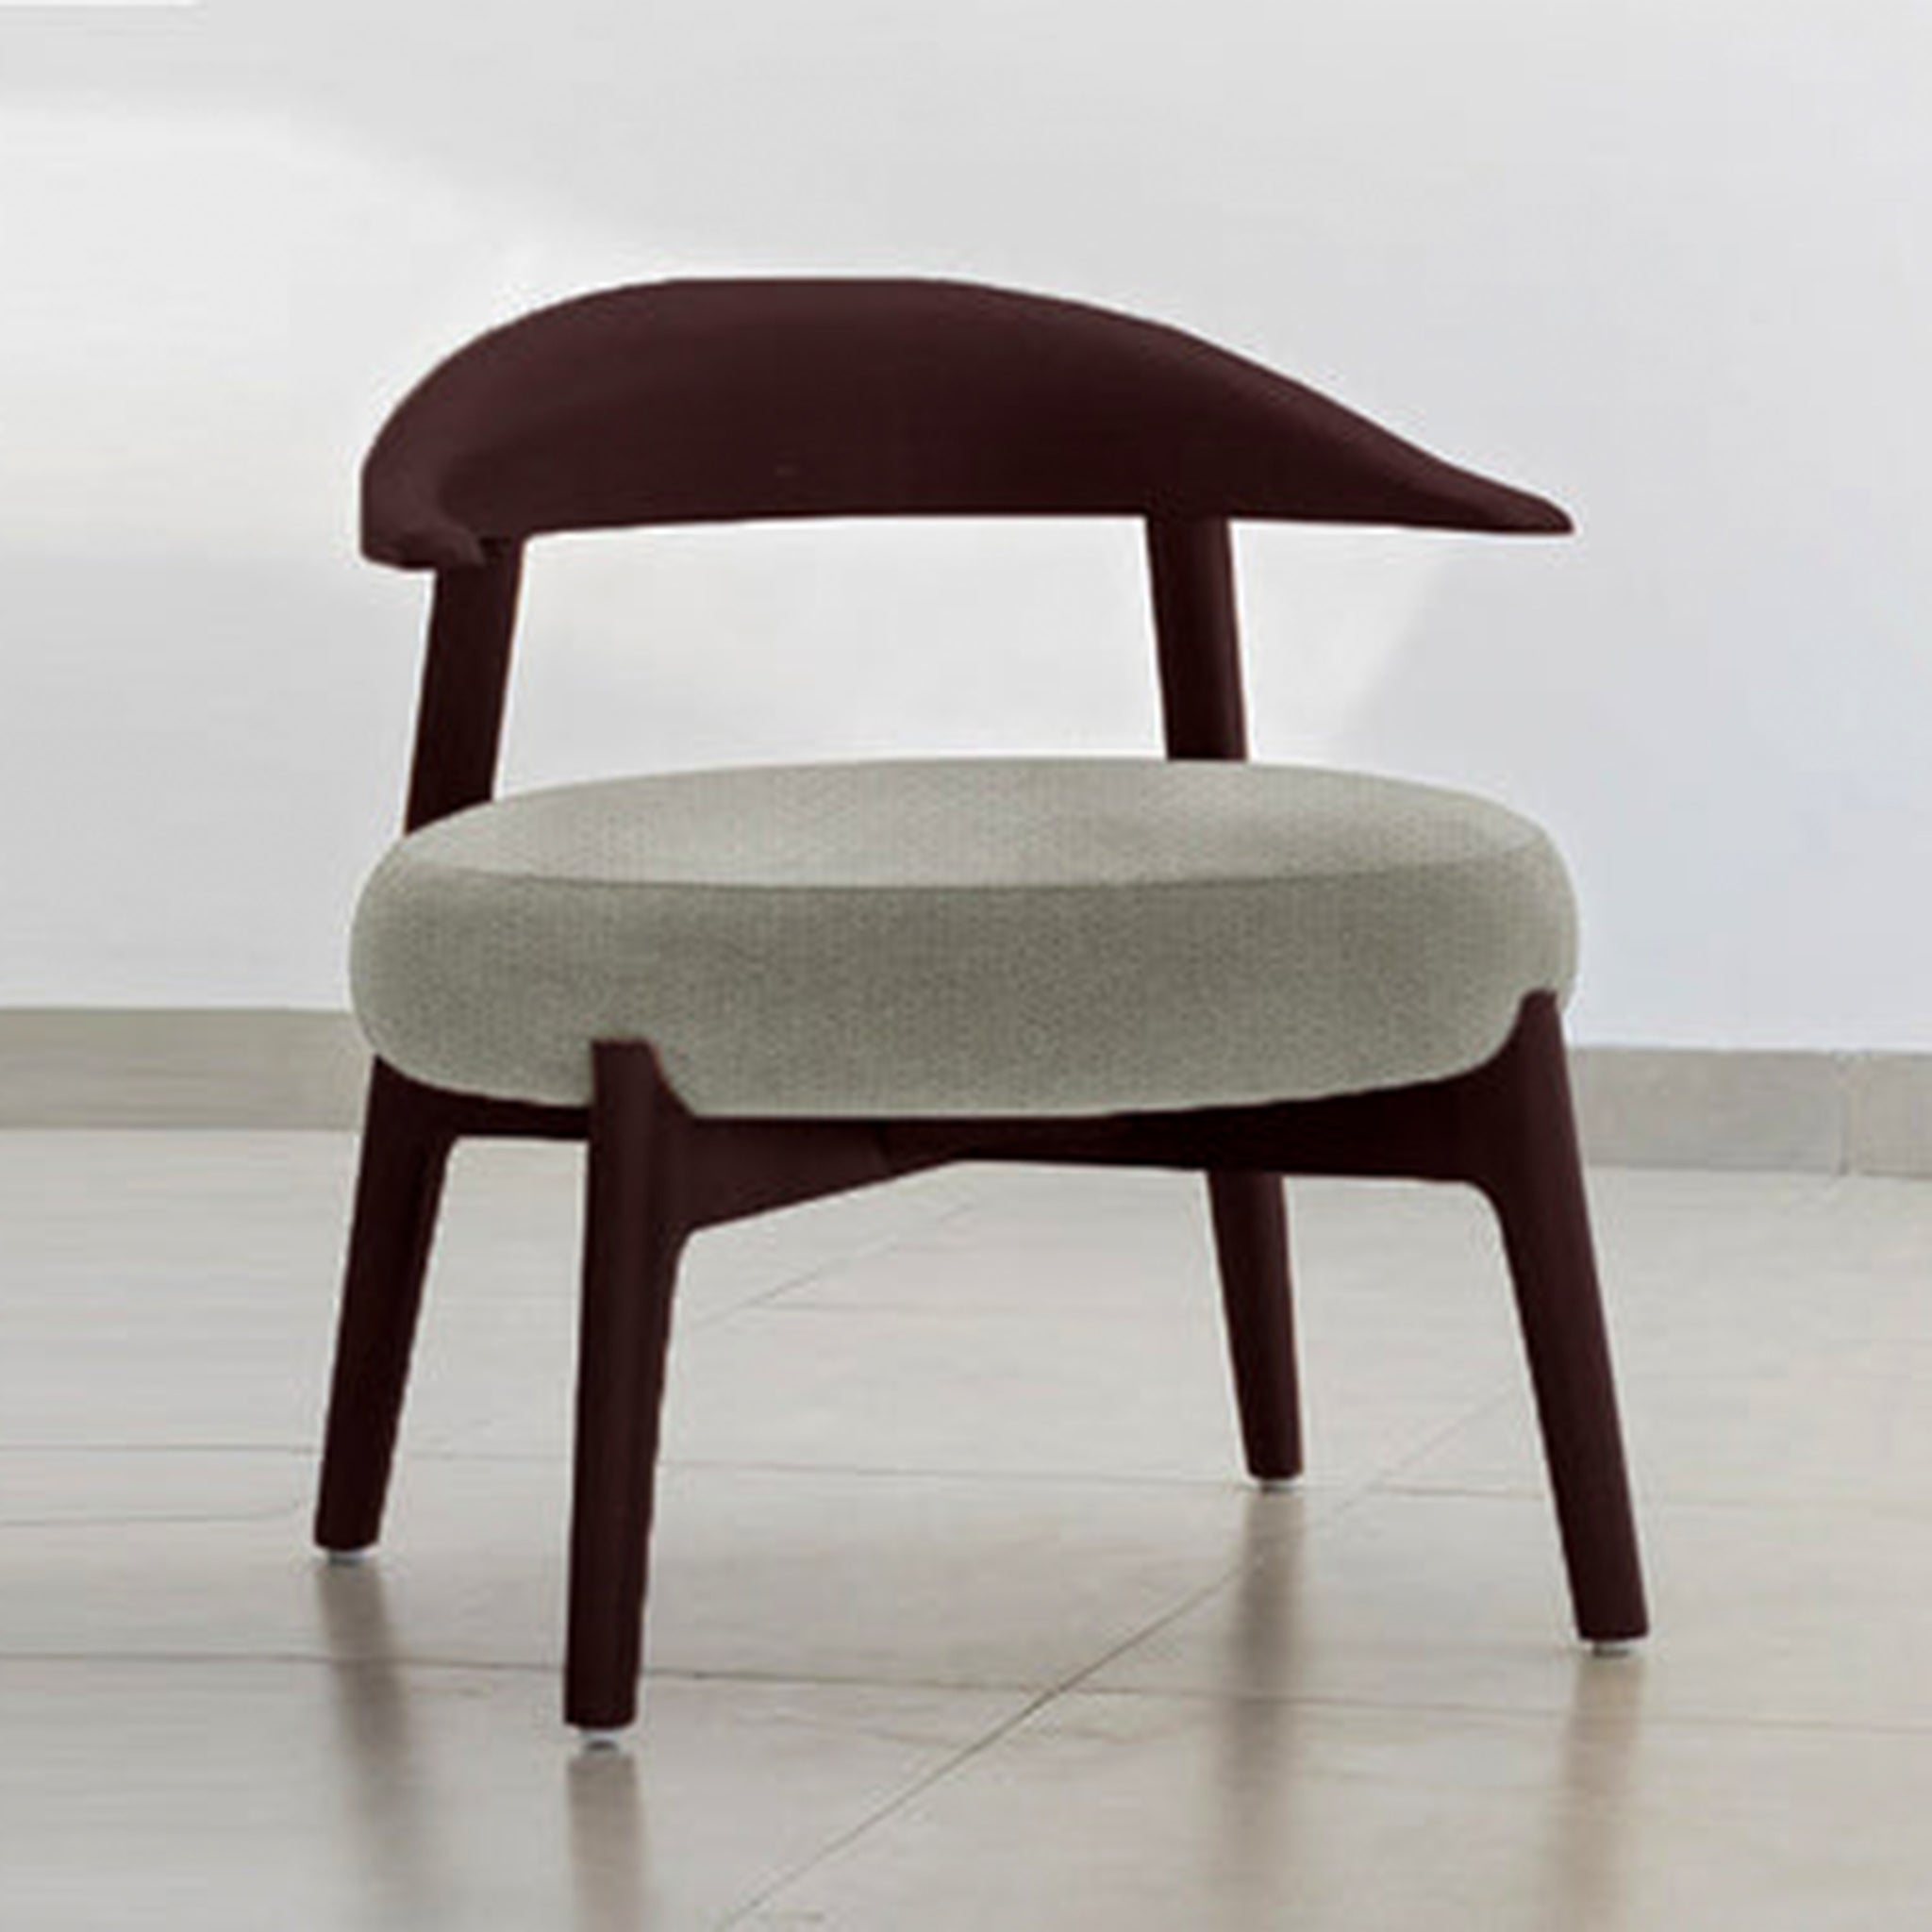 "Sophisticated and stylish Hyde Accent Chair for contemporary interiors"